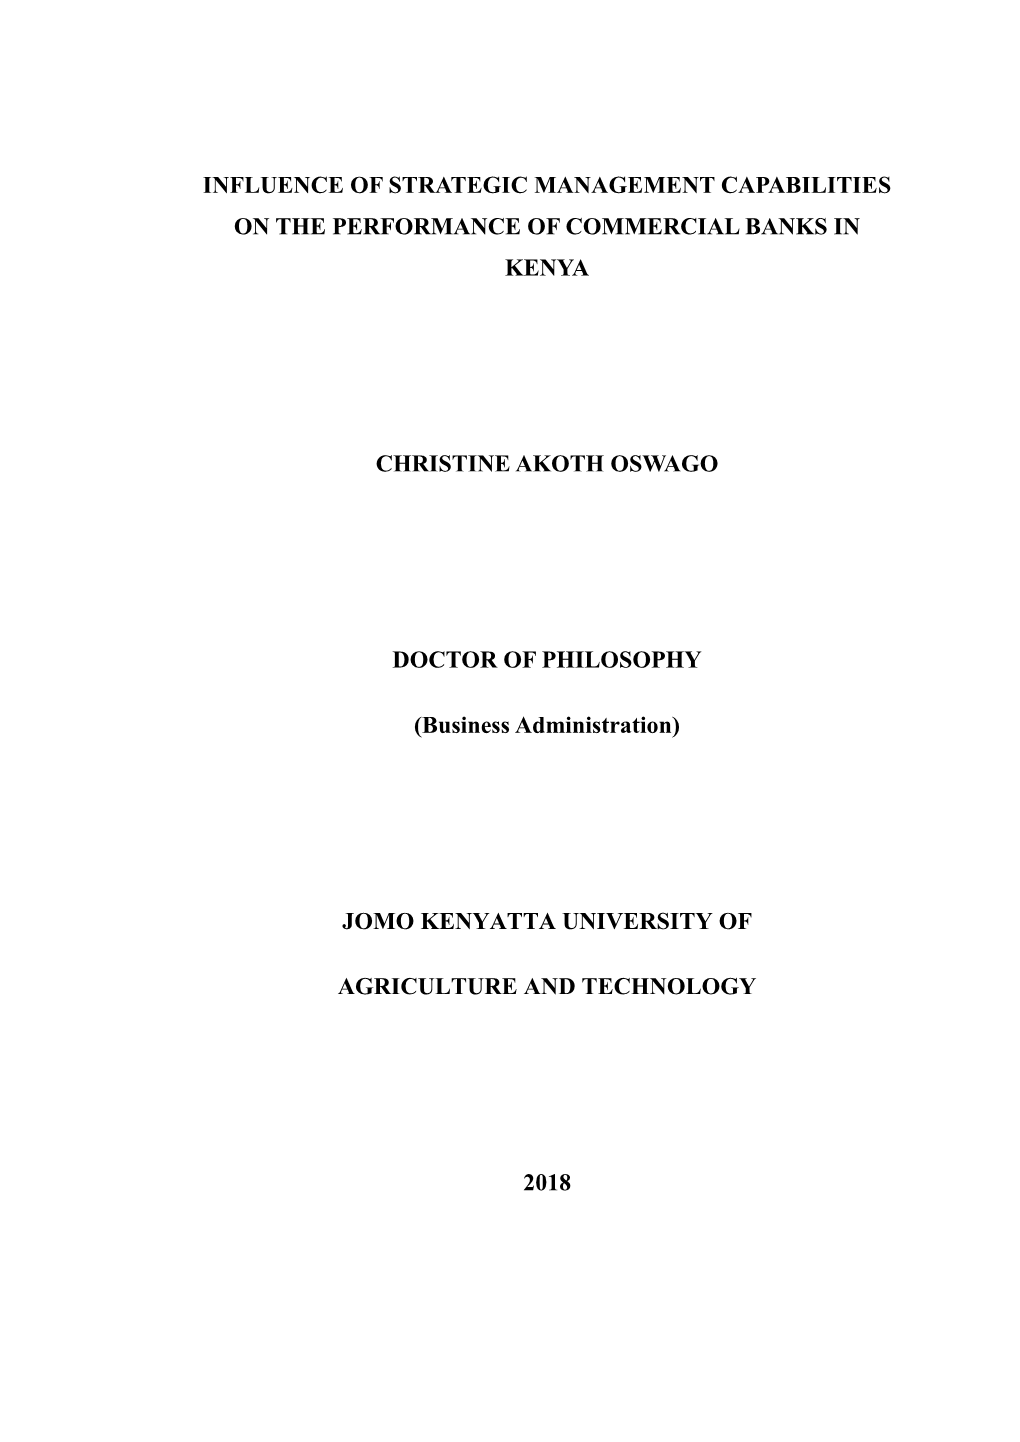 Influence of Strategic Management Capabilities on the Performance of Commercial Banks in Kenya